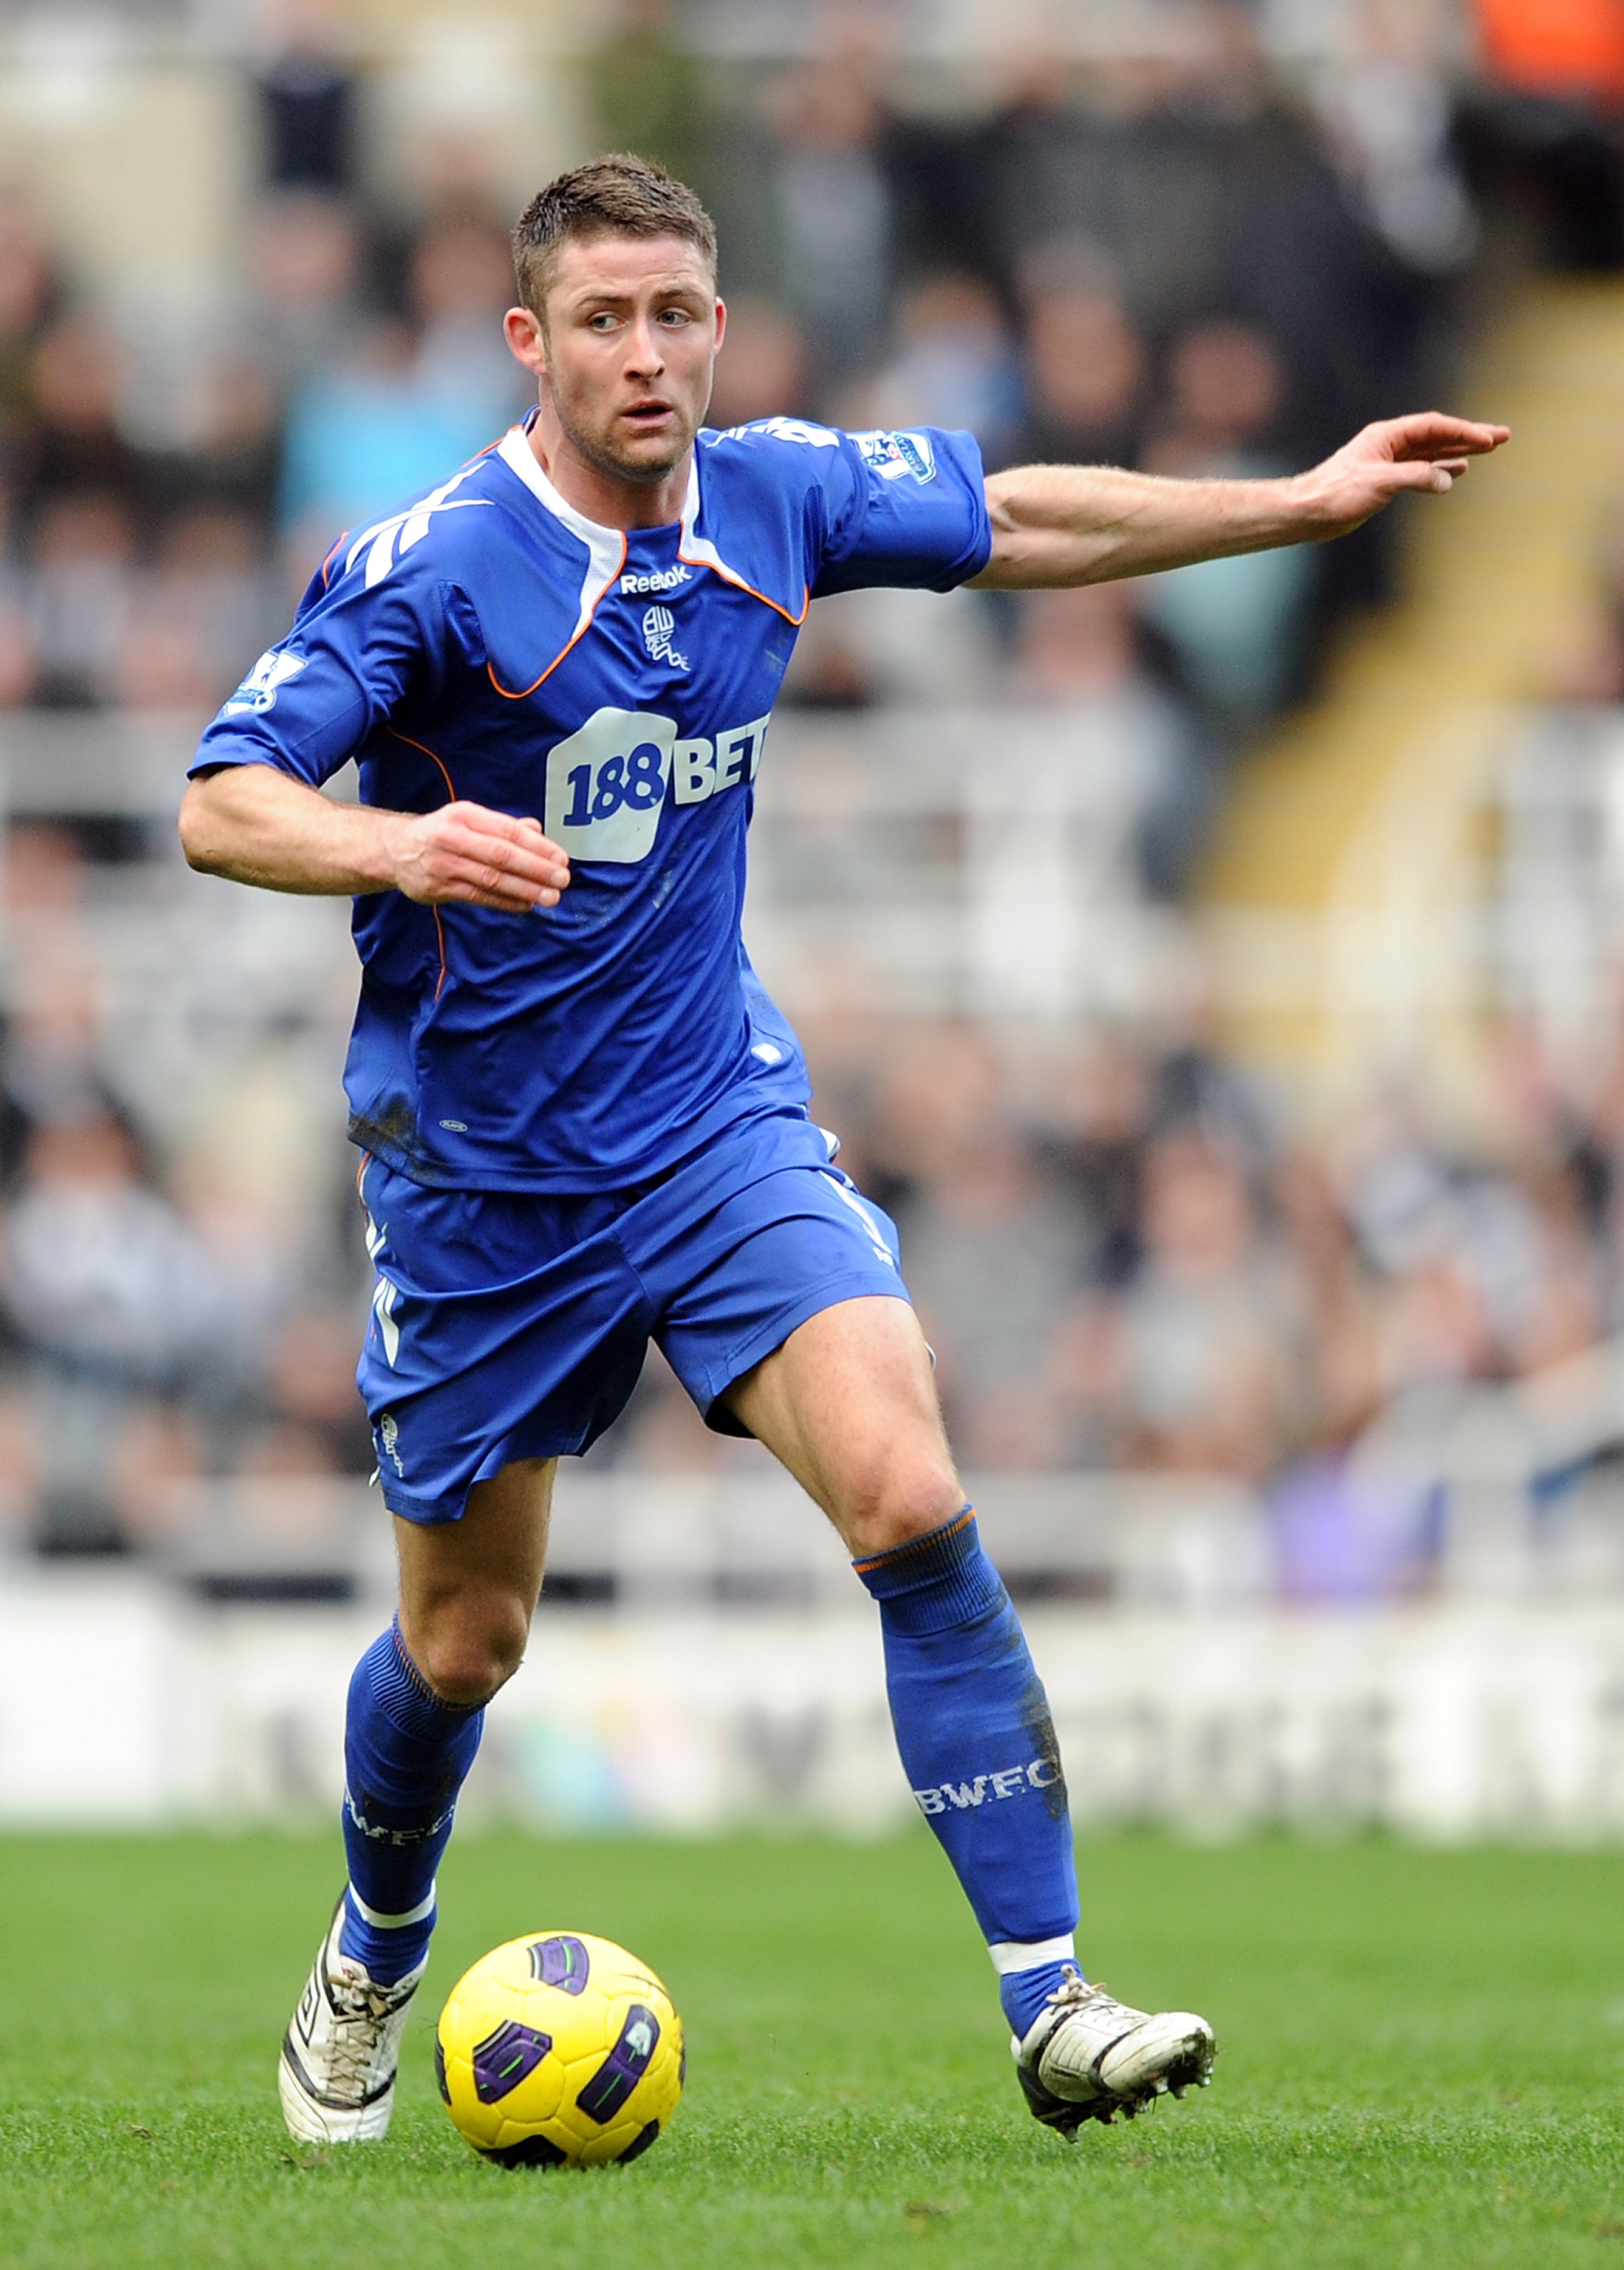 NEWCASTLE UPON TYNE, ENGLAND - FEBRUARY 26: Gary Cahill of Bolton Wanderers in action during the Barclays Premier League match between Newcastle United and Bolton Wanderers at St James' Park on February 26, 2011 in Newcastle upon Tyne, England.  (Photo by